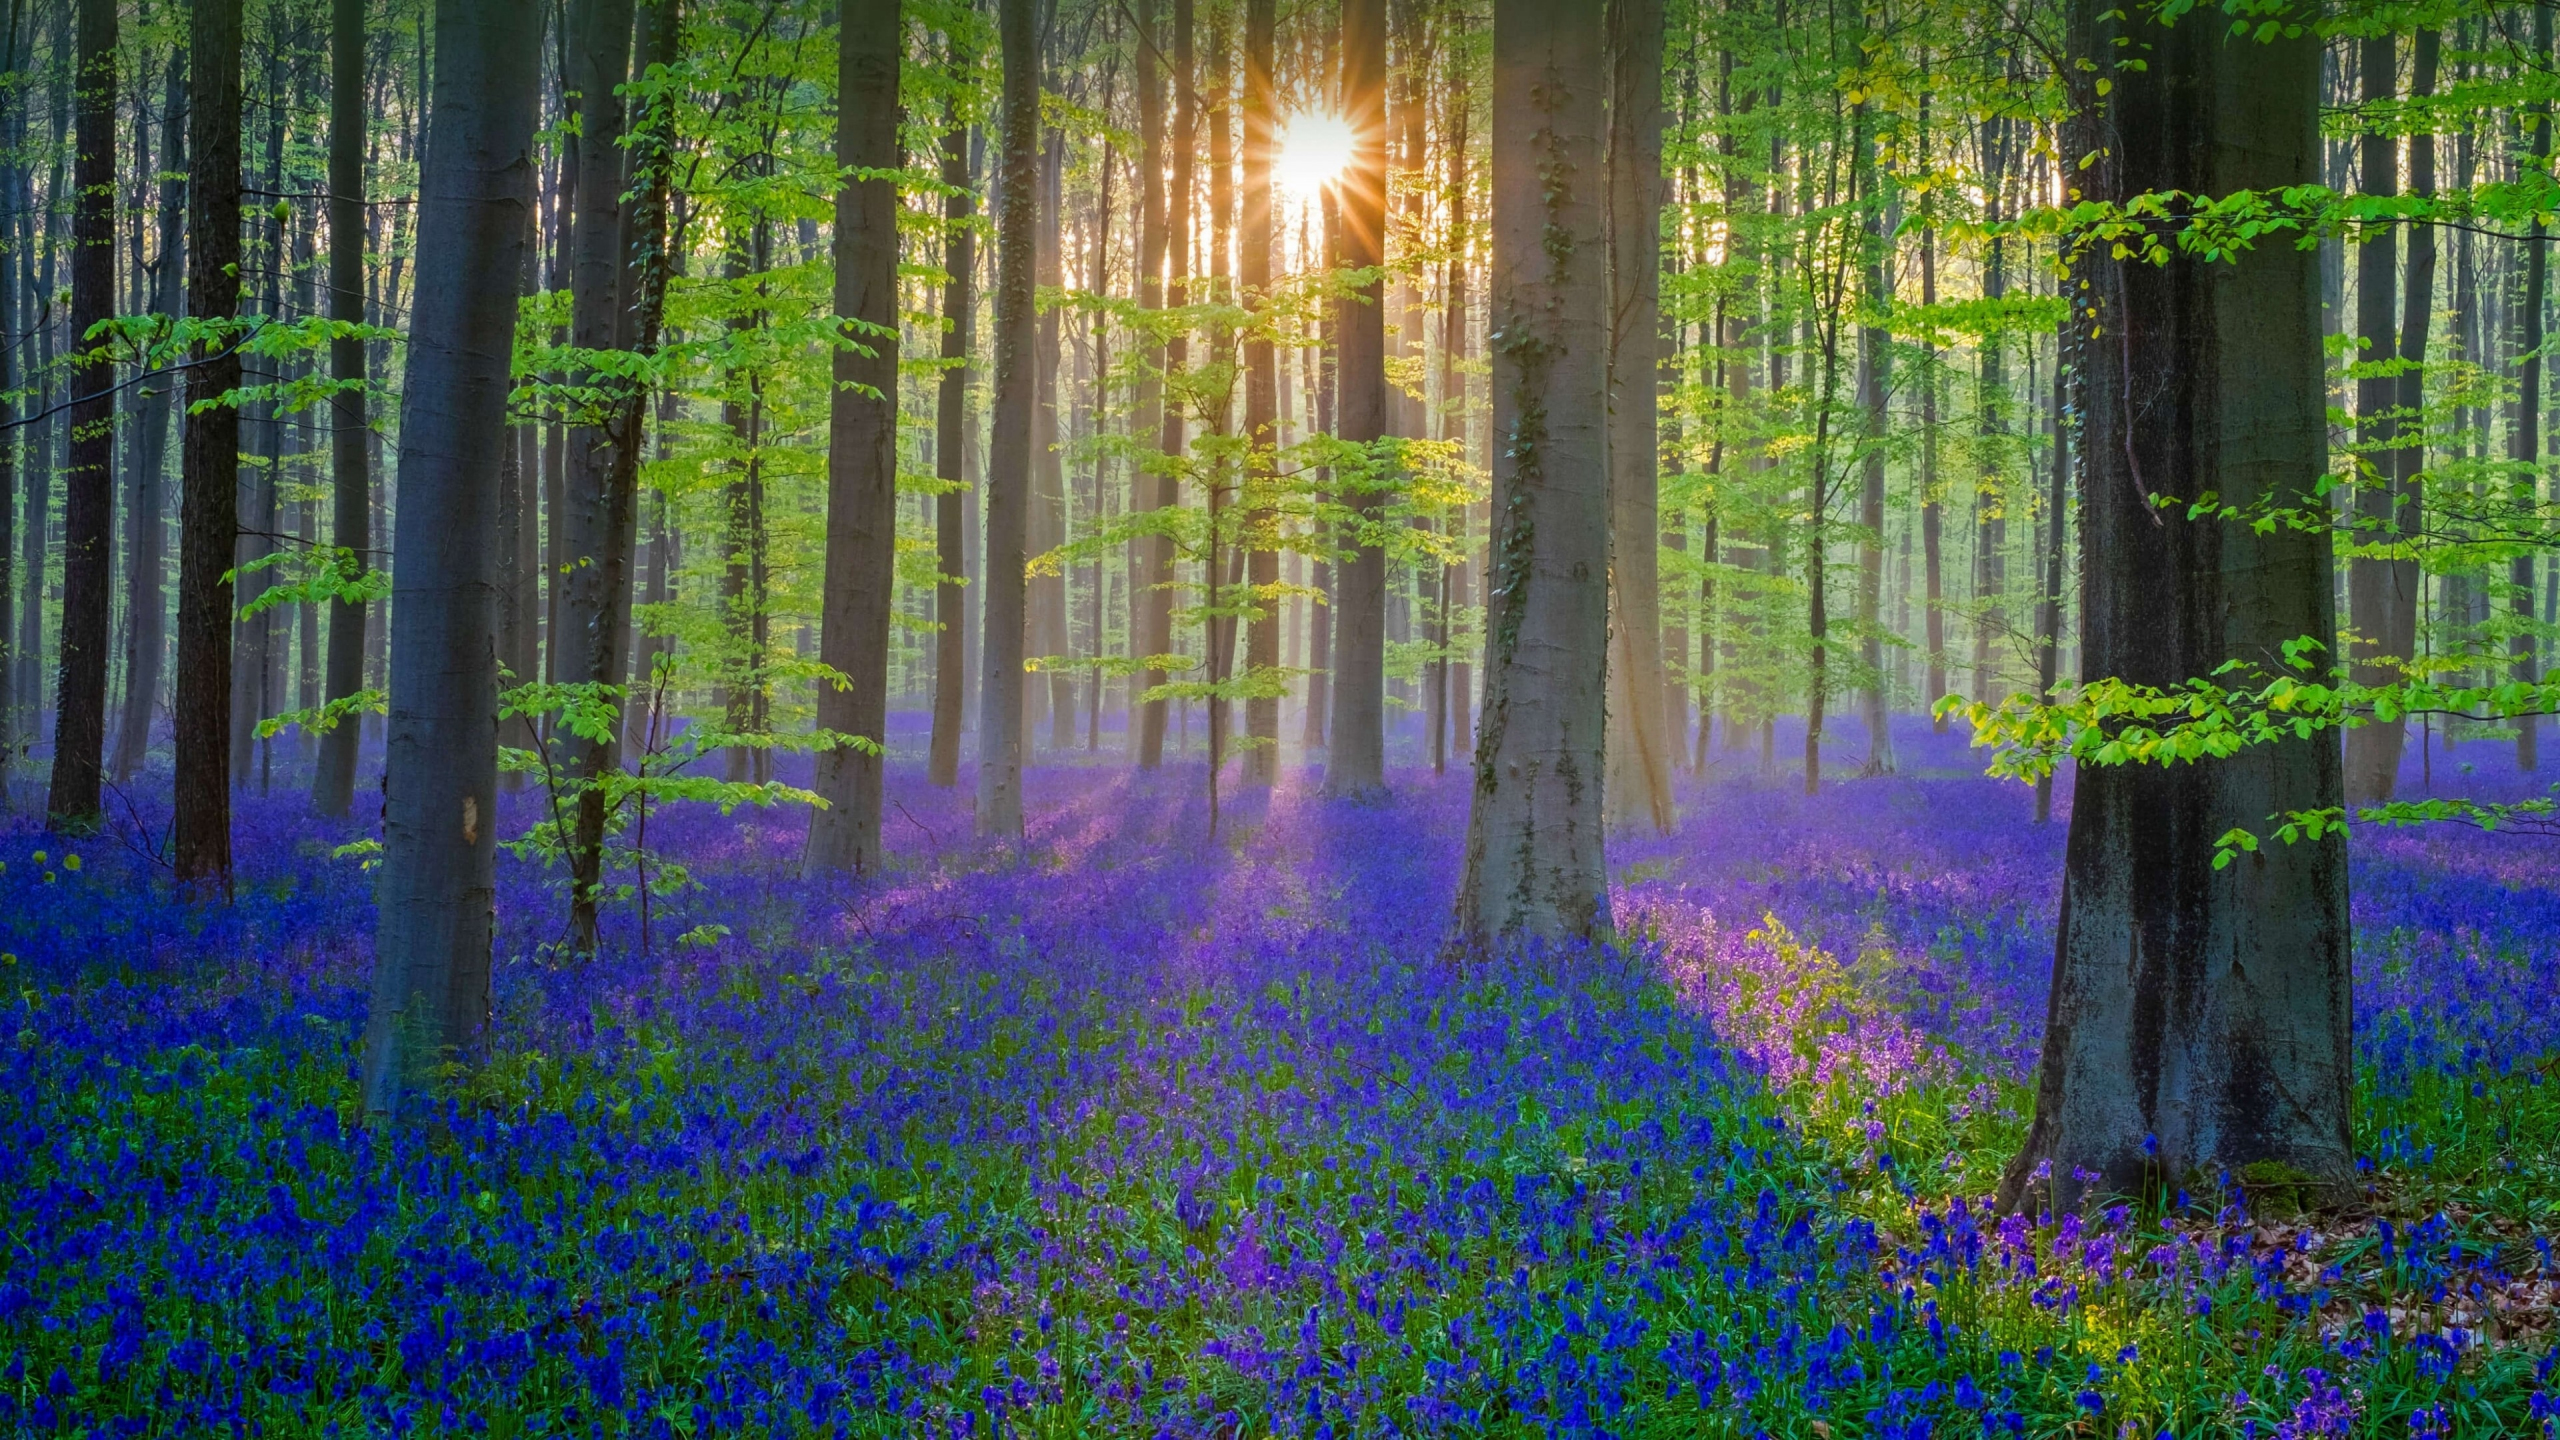 Download wallpaper 2560x1440 blue flowers, plants, forest, spring, nature, dual wide 16:9 2560x1440 HD background, 27338